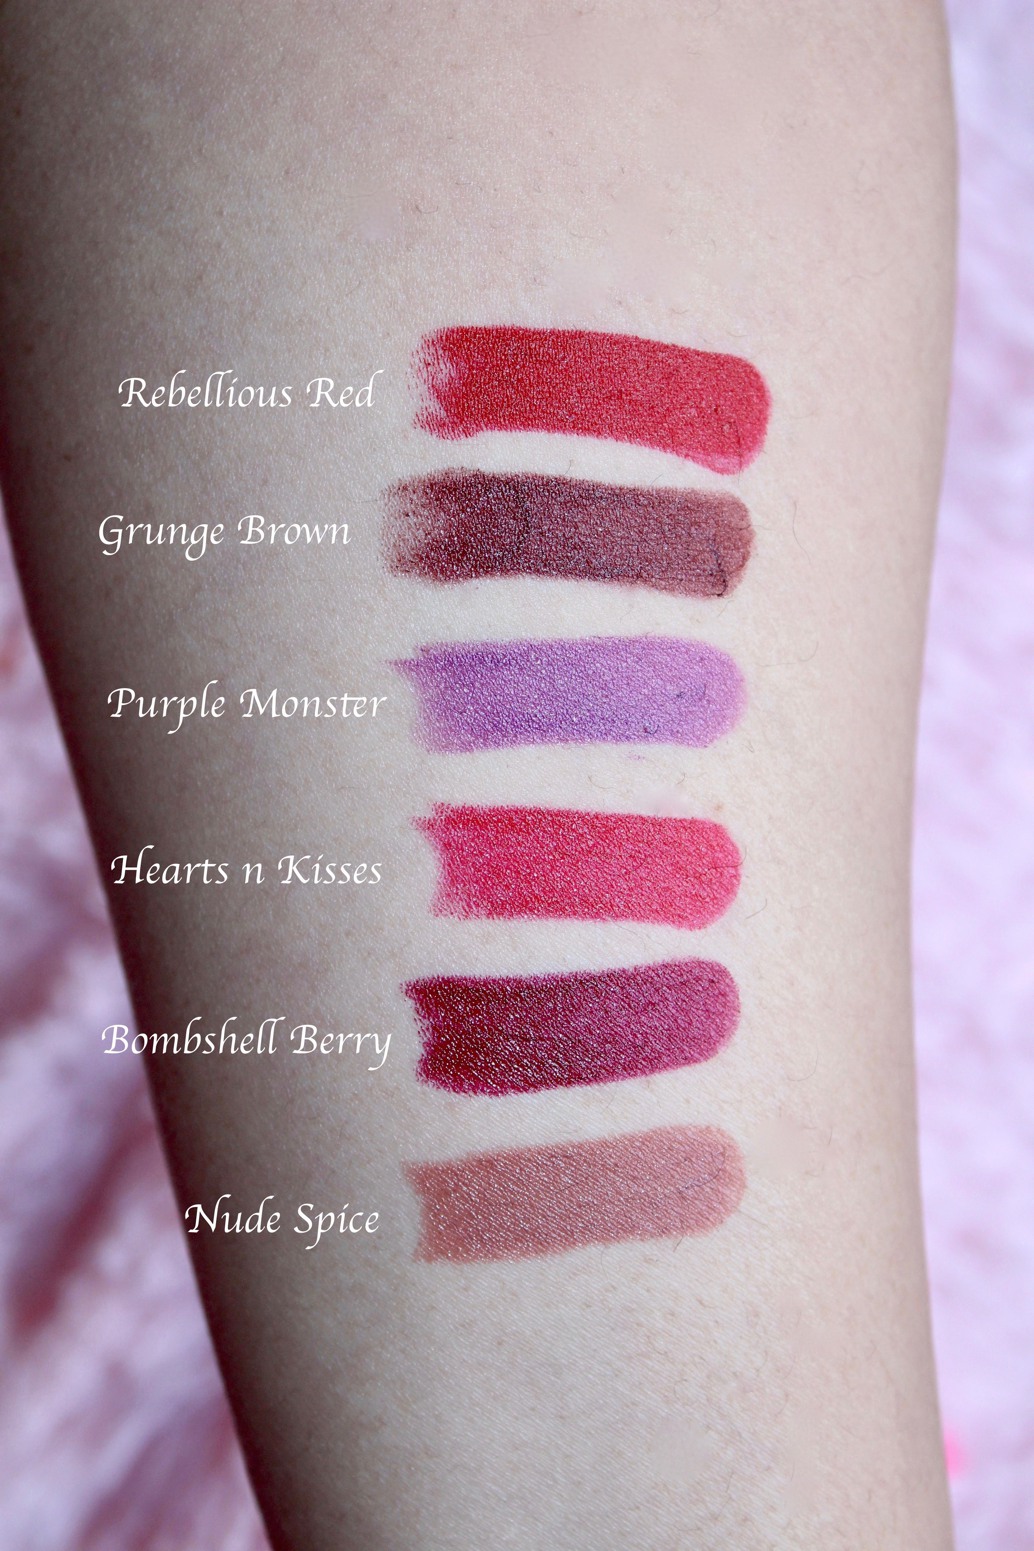 NYKAA Paintstix Lipstick Collection: Review + Swatches of 